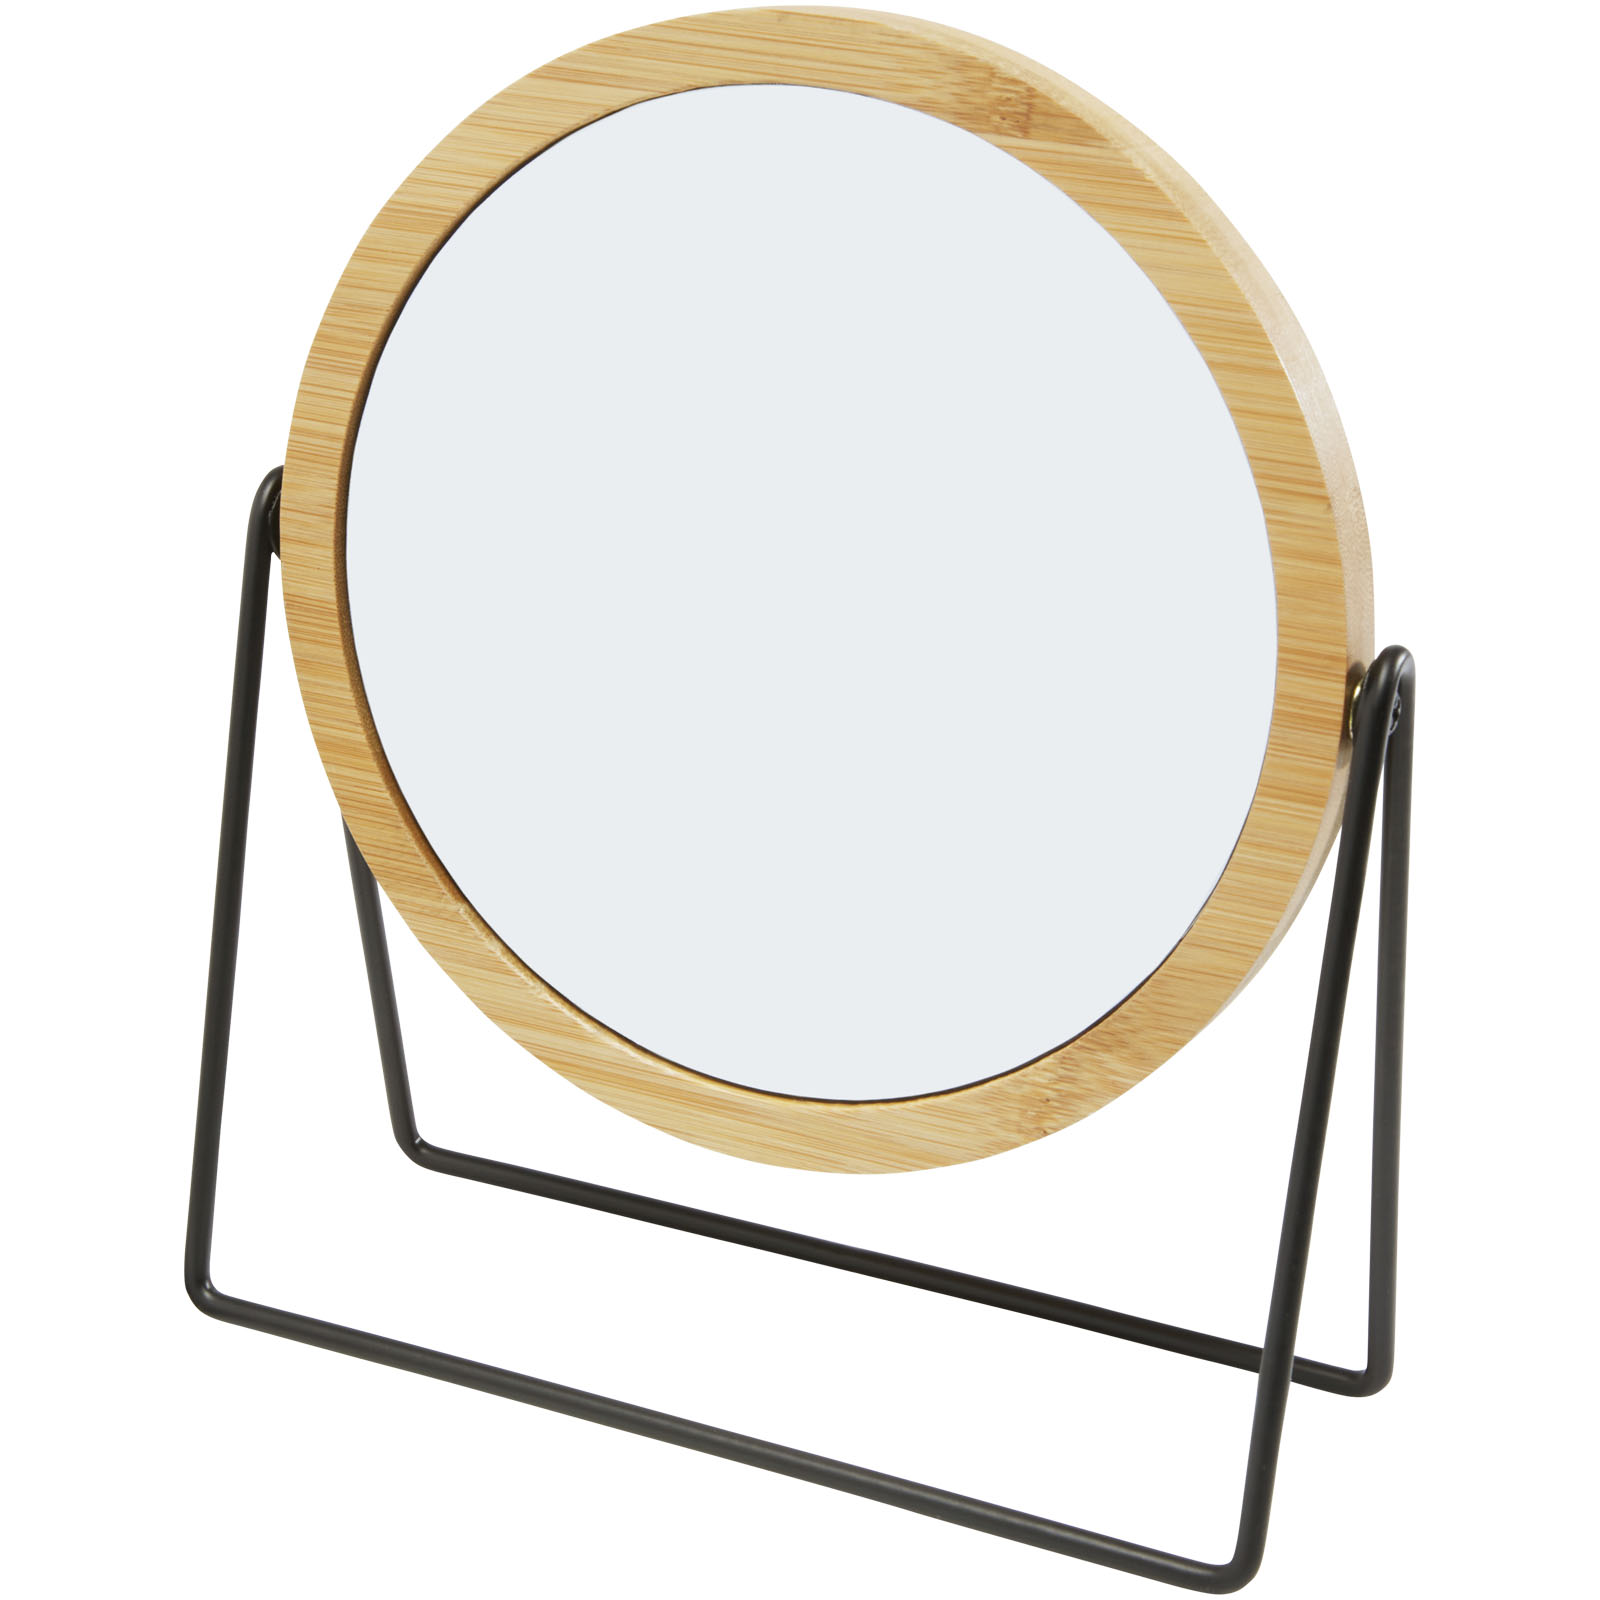 Personal Care - Hyrra bamboo standing mirror